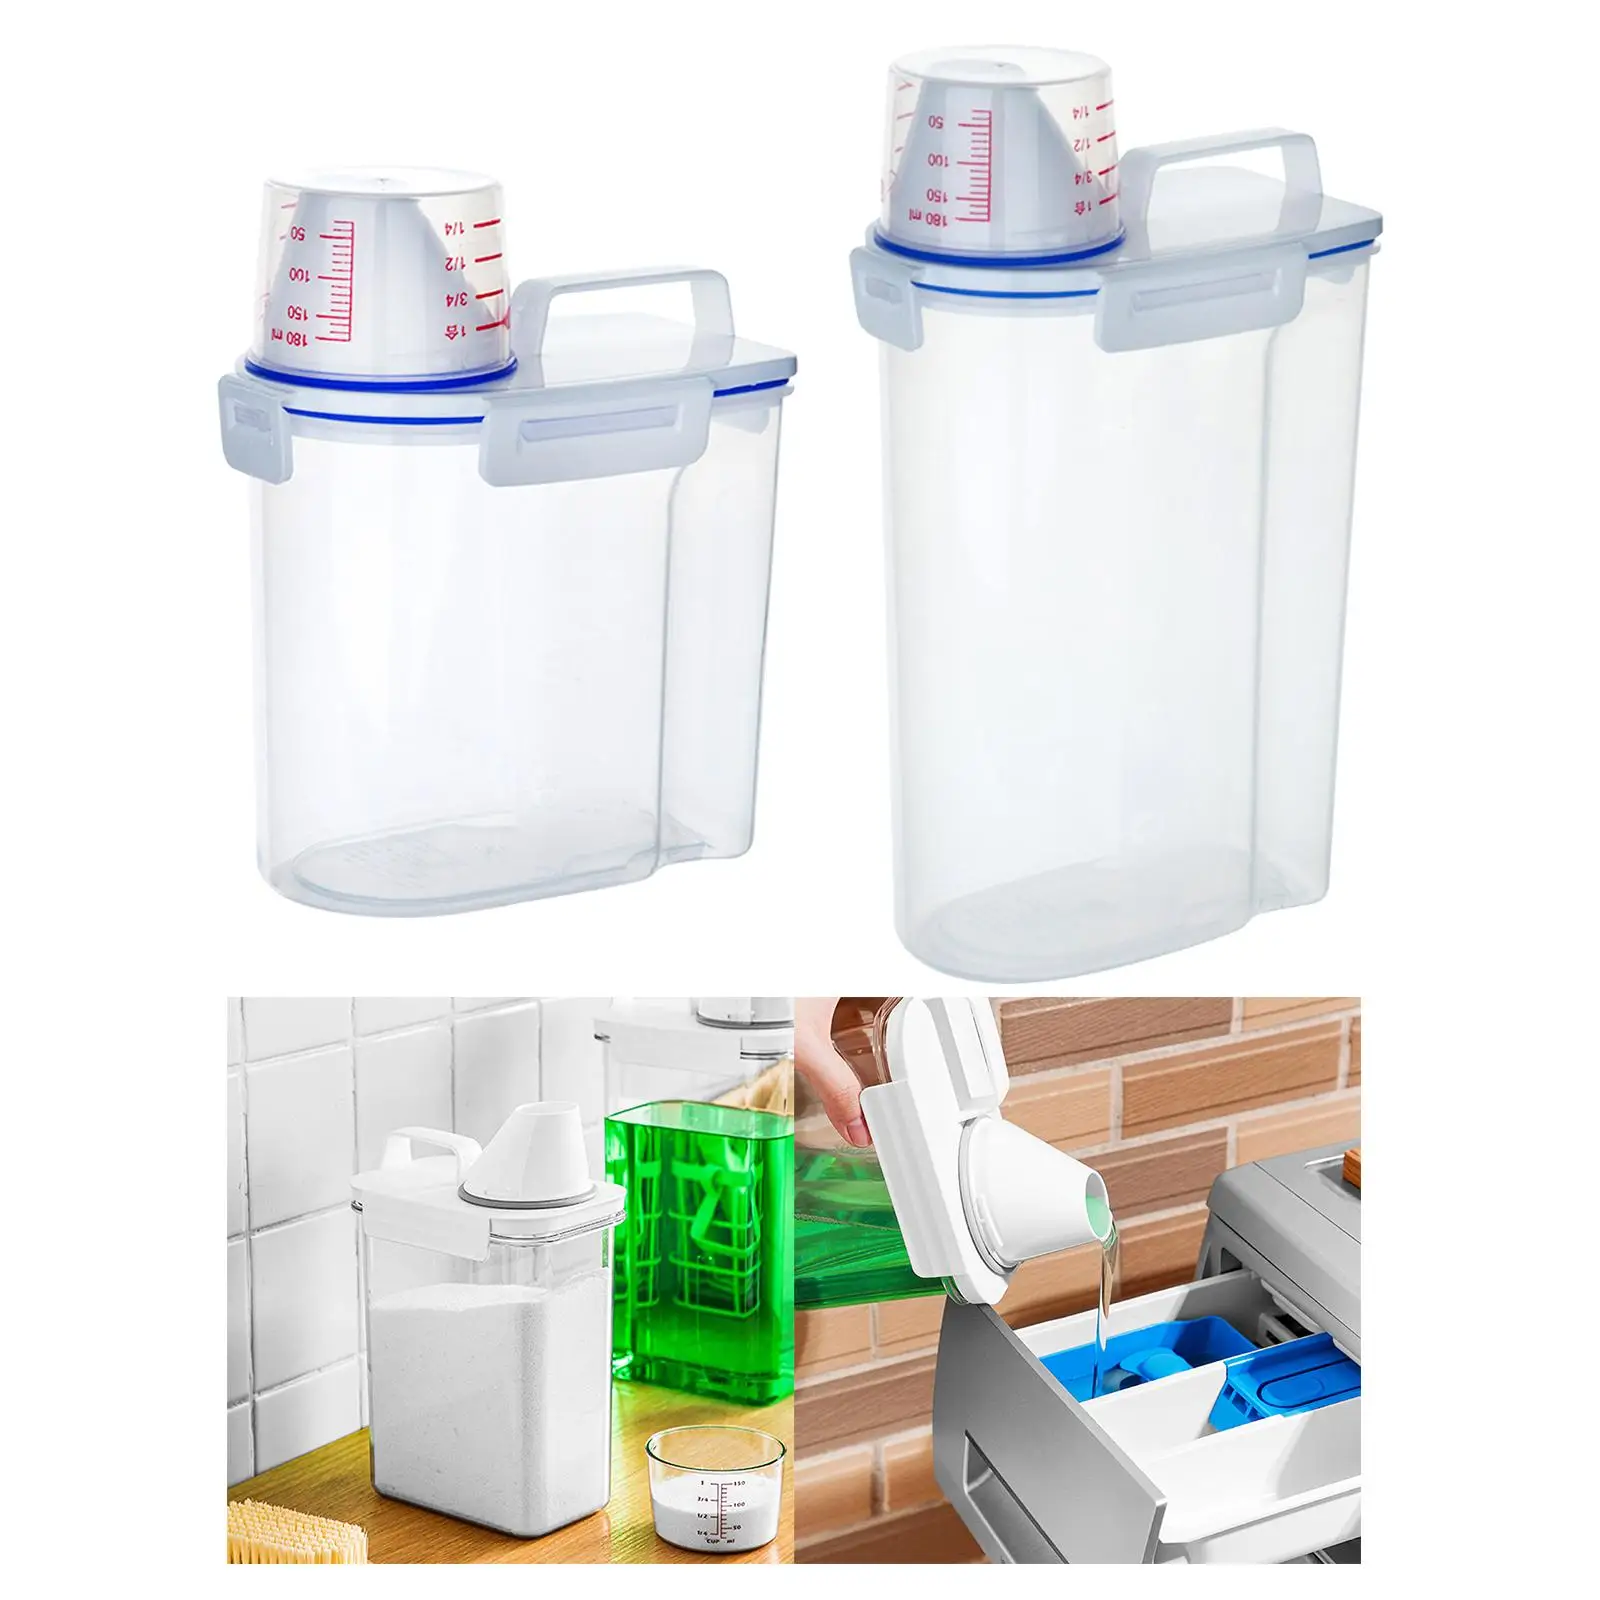 Airtight Cereal Container Storage Canister with Measuring Cup Dry Food Storage Container for Grain Sugar Rice Snack Cereal